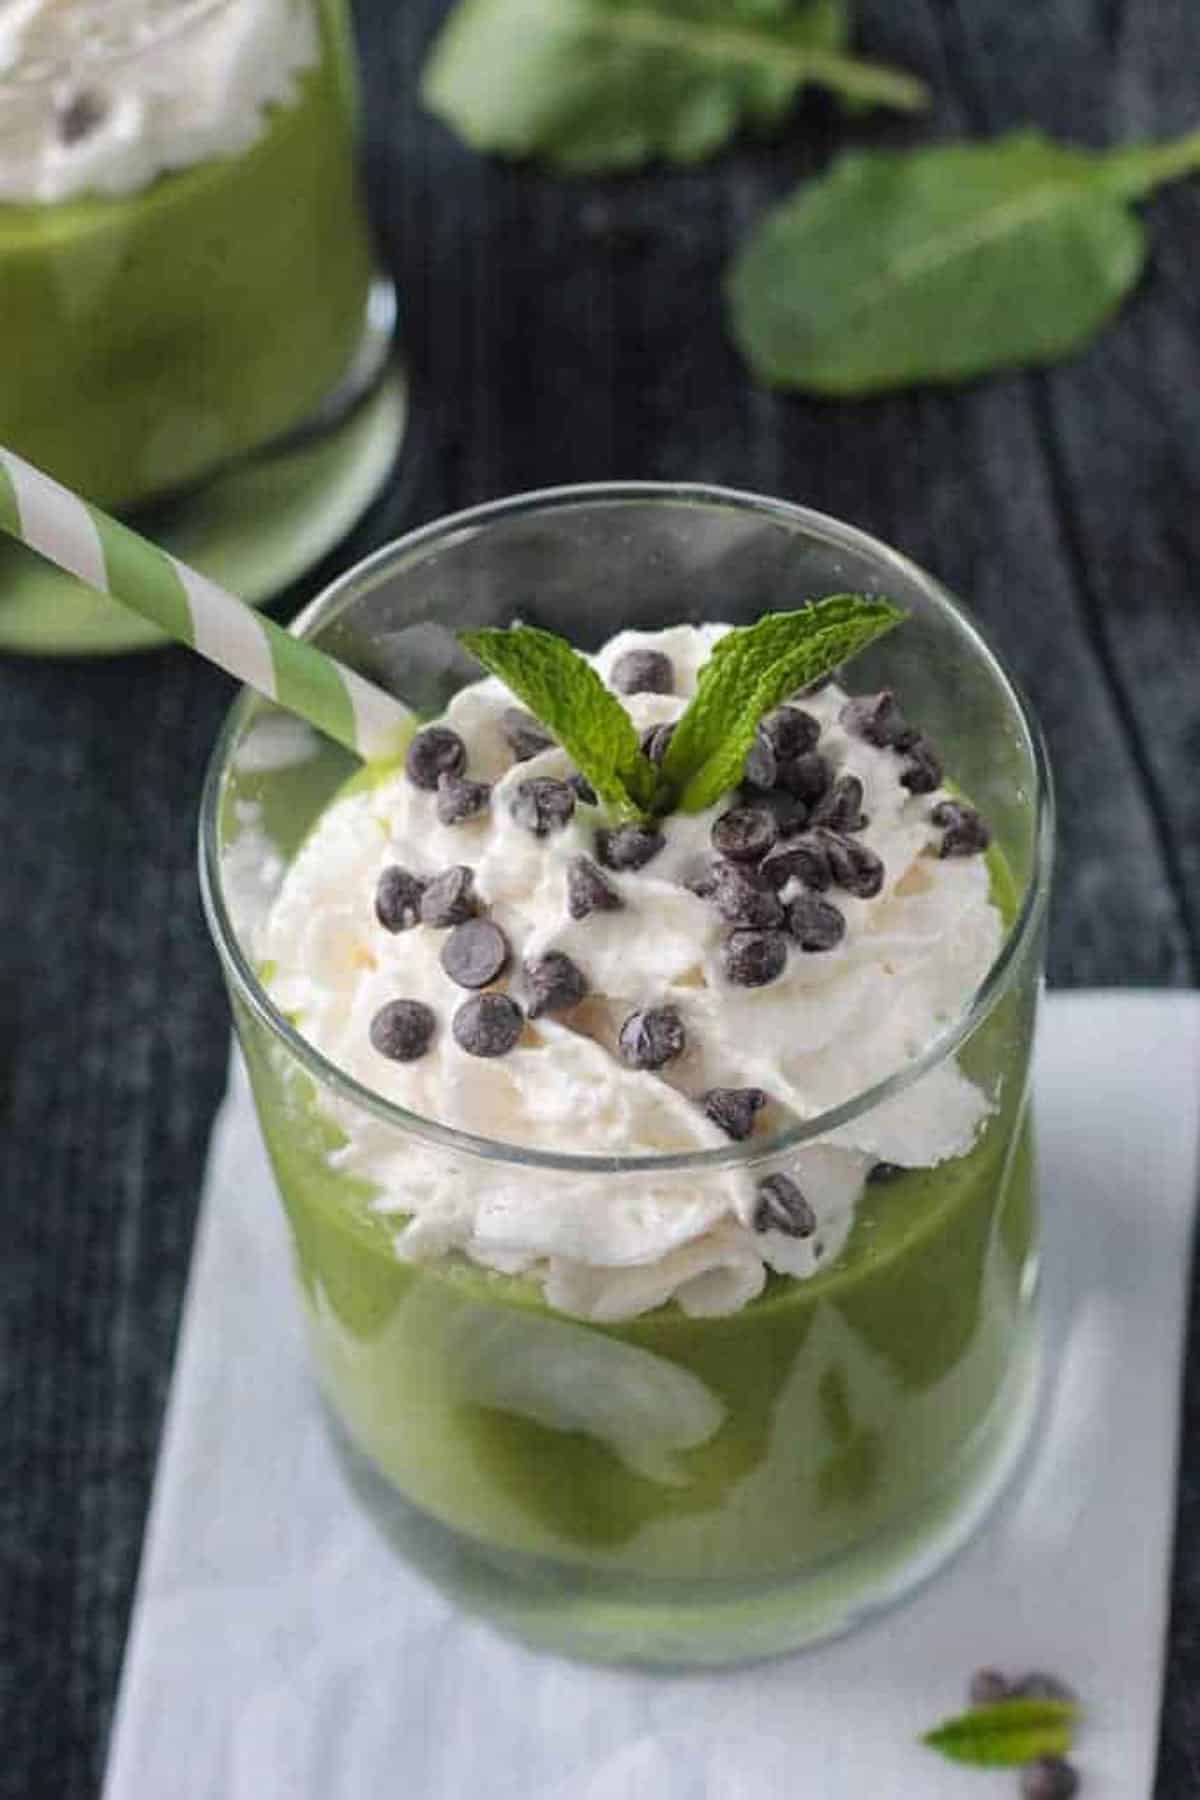 Green smoothie topped with whipped cream, chocolate chips, and a sprig of mint.